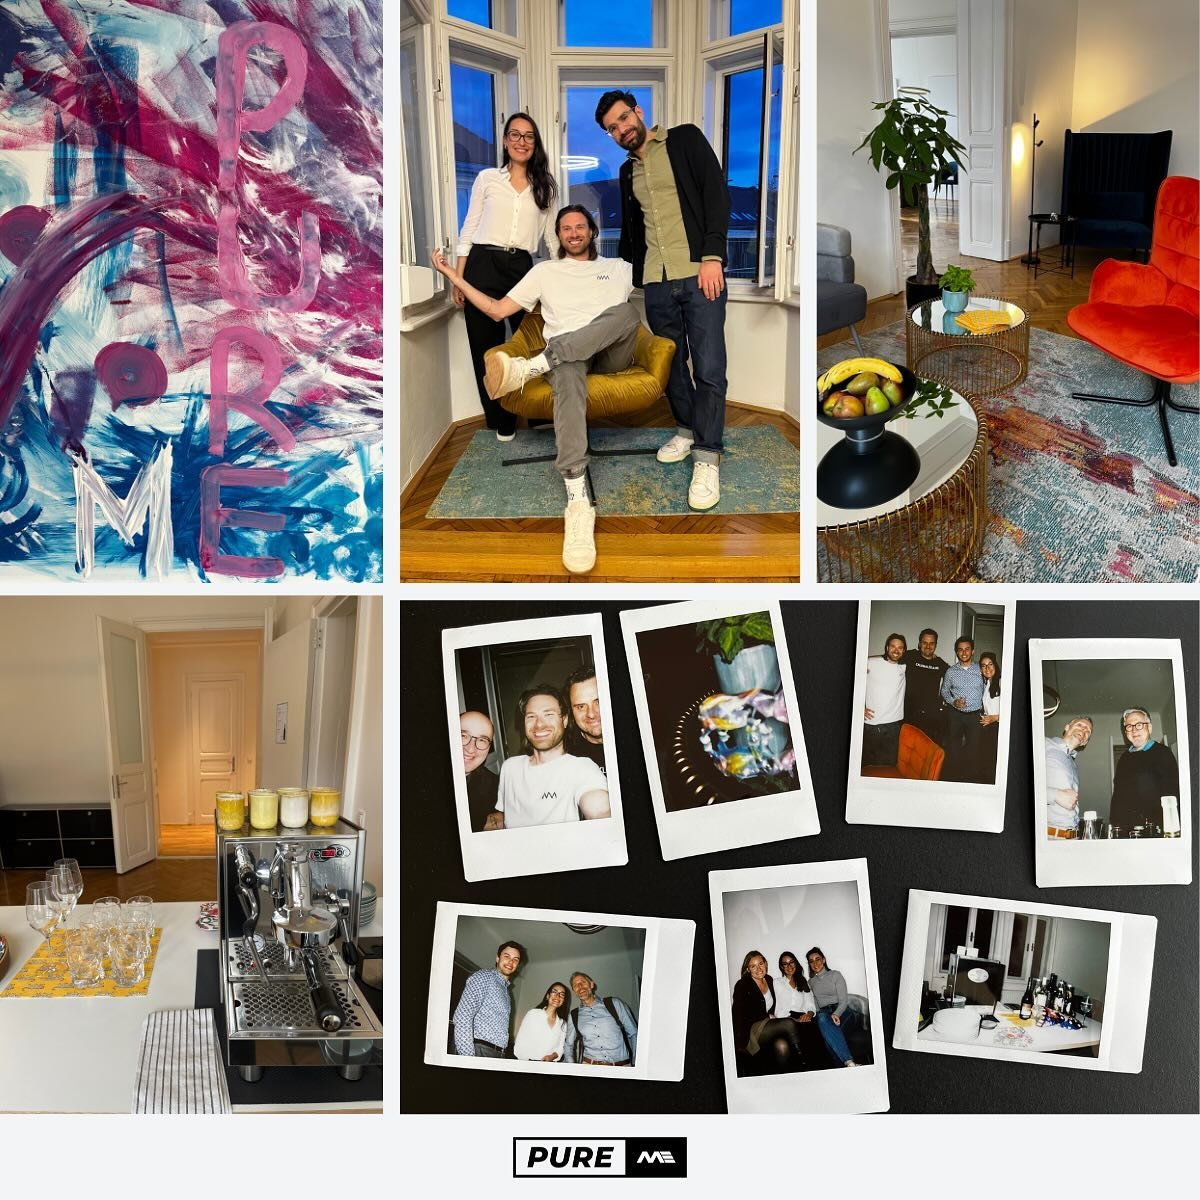 🎉 Welcome to PURE ME 🎉
We have officially opened the doors of our brand-new office space in Graz! 🏢✨
Yesterday we had the pleasure of hosting our first guests for a small get-together, and we couldn&rsquo;t be more grateful for the laughter and ha